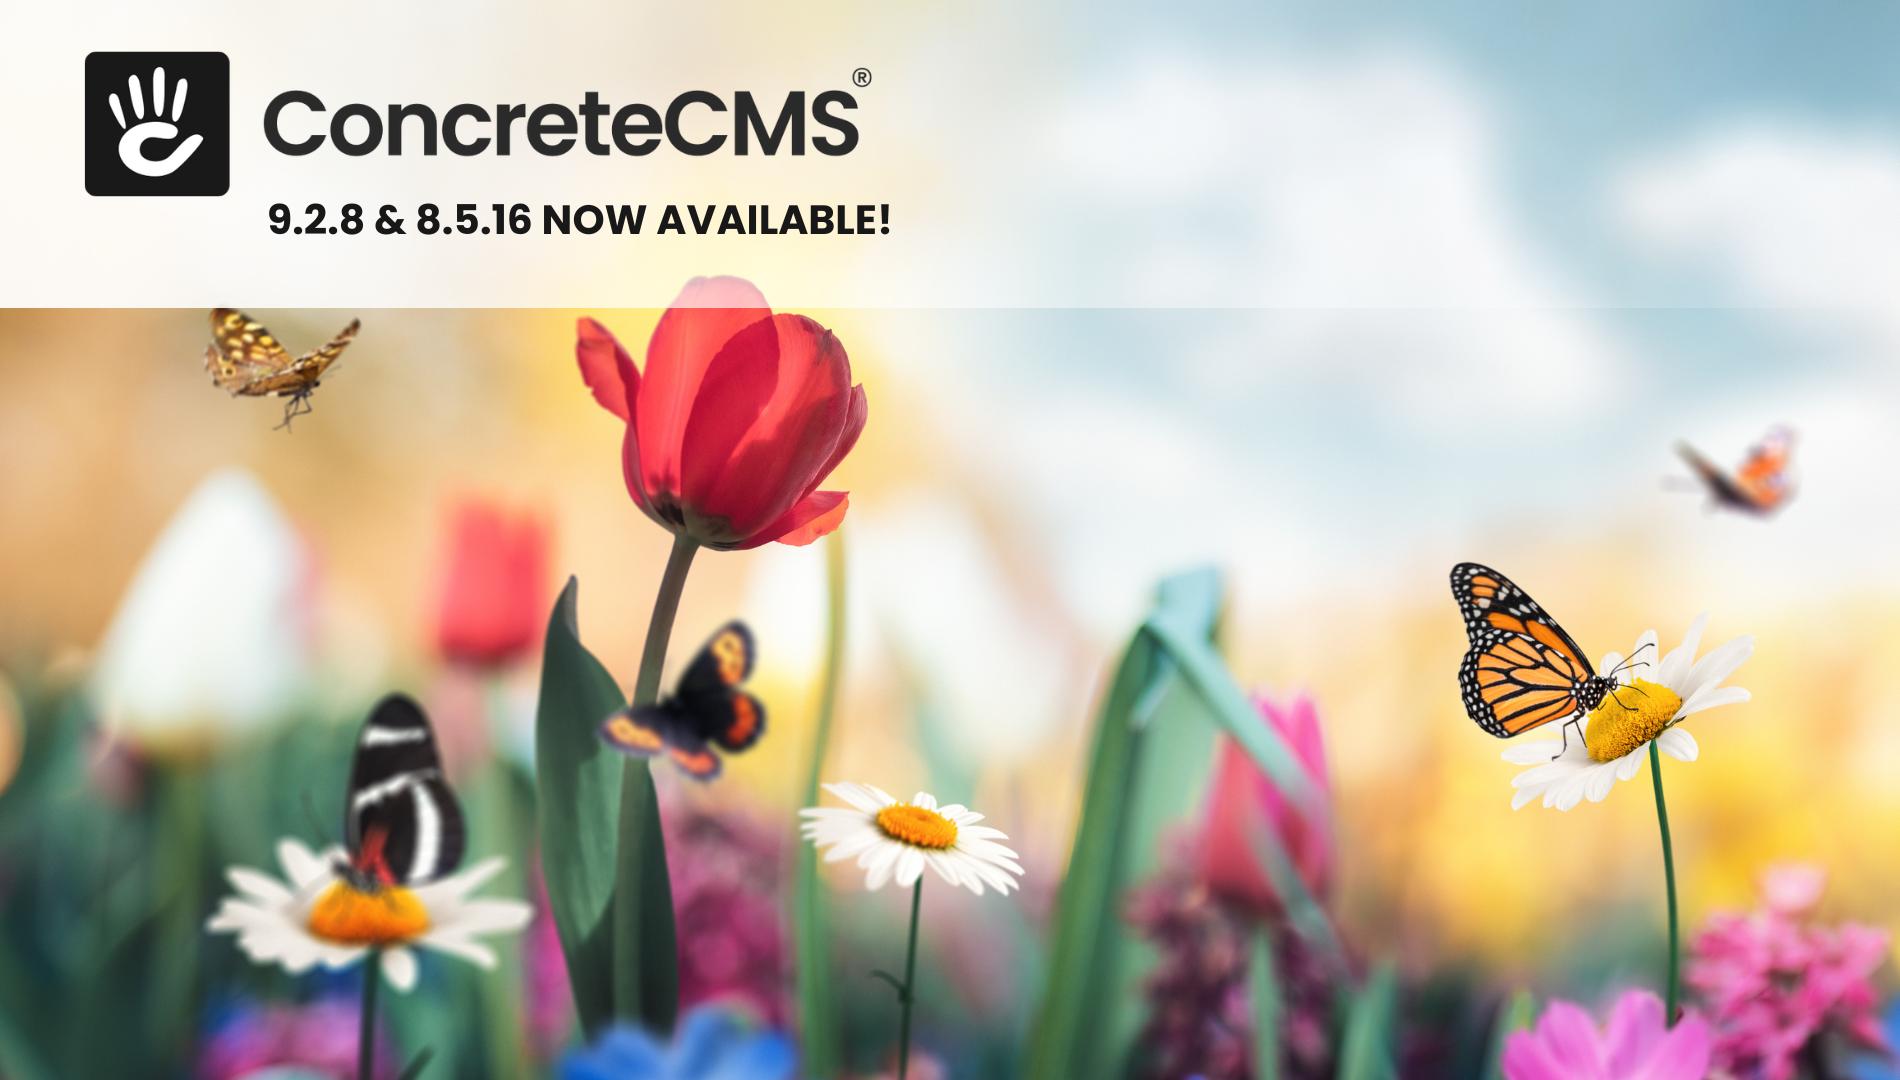 Announcing Concrete CMS 9.2.8 and 8.5.16 Release